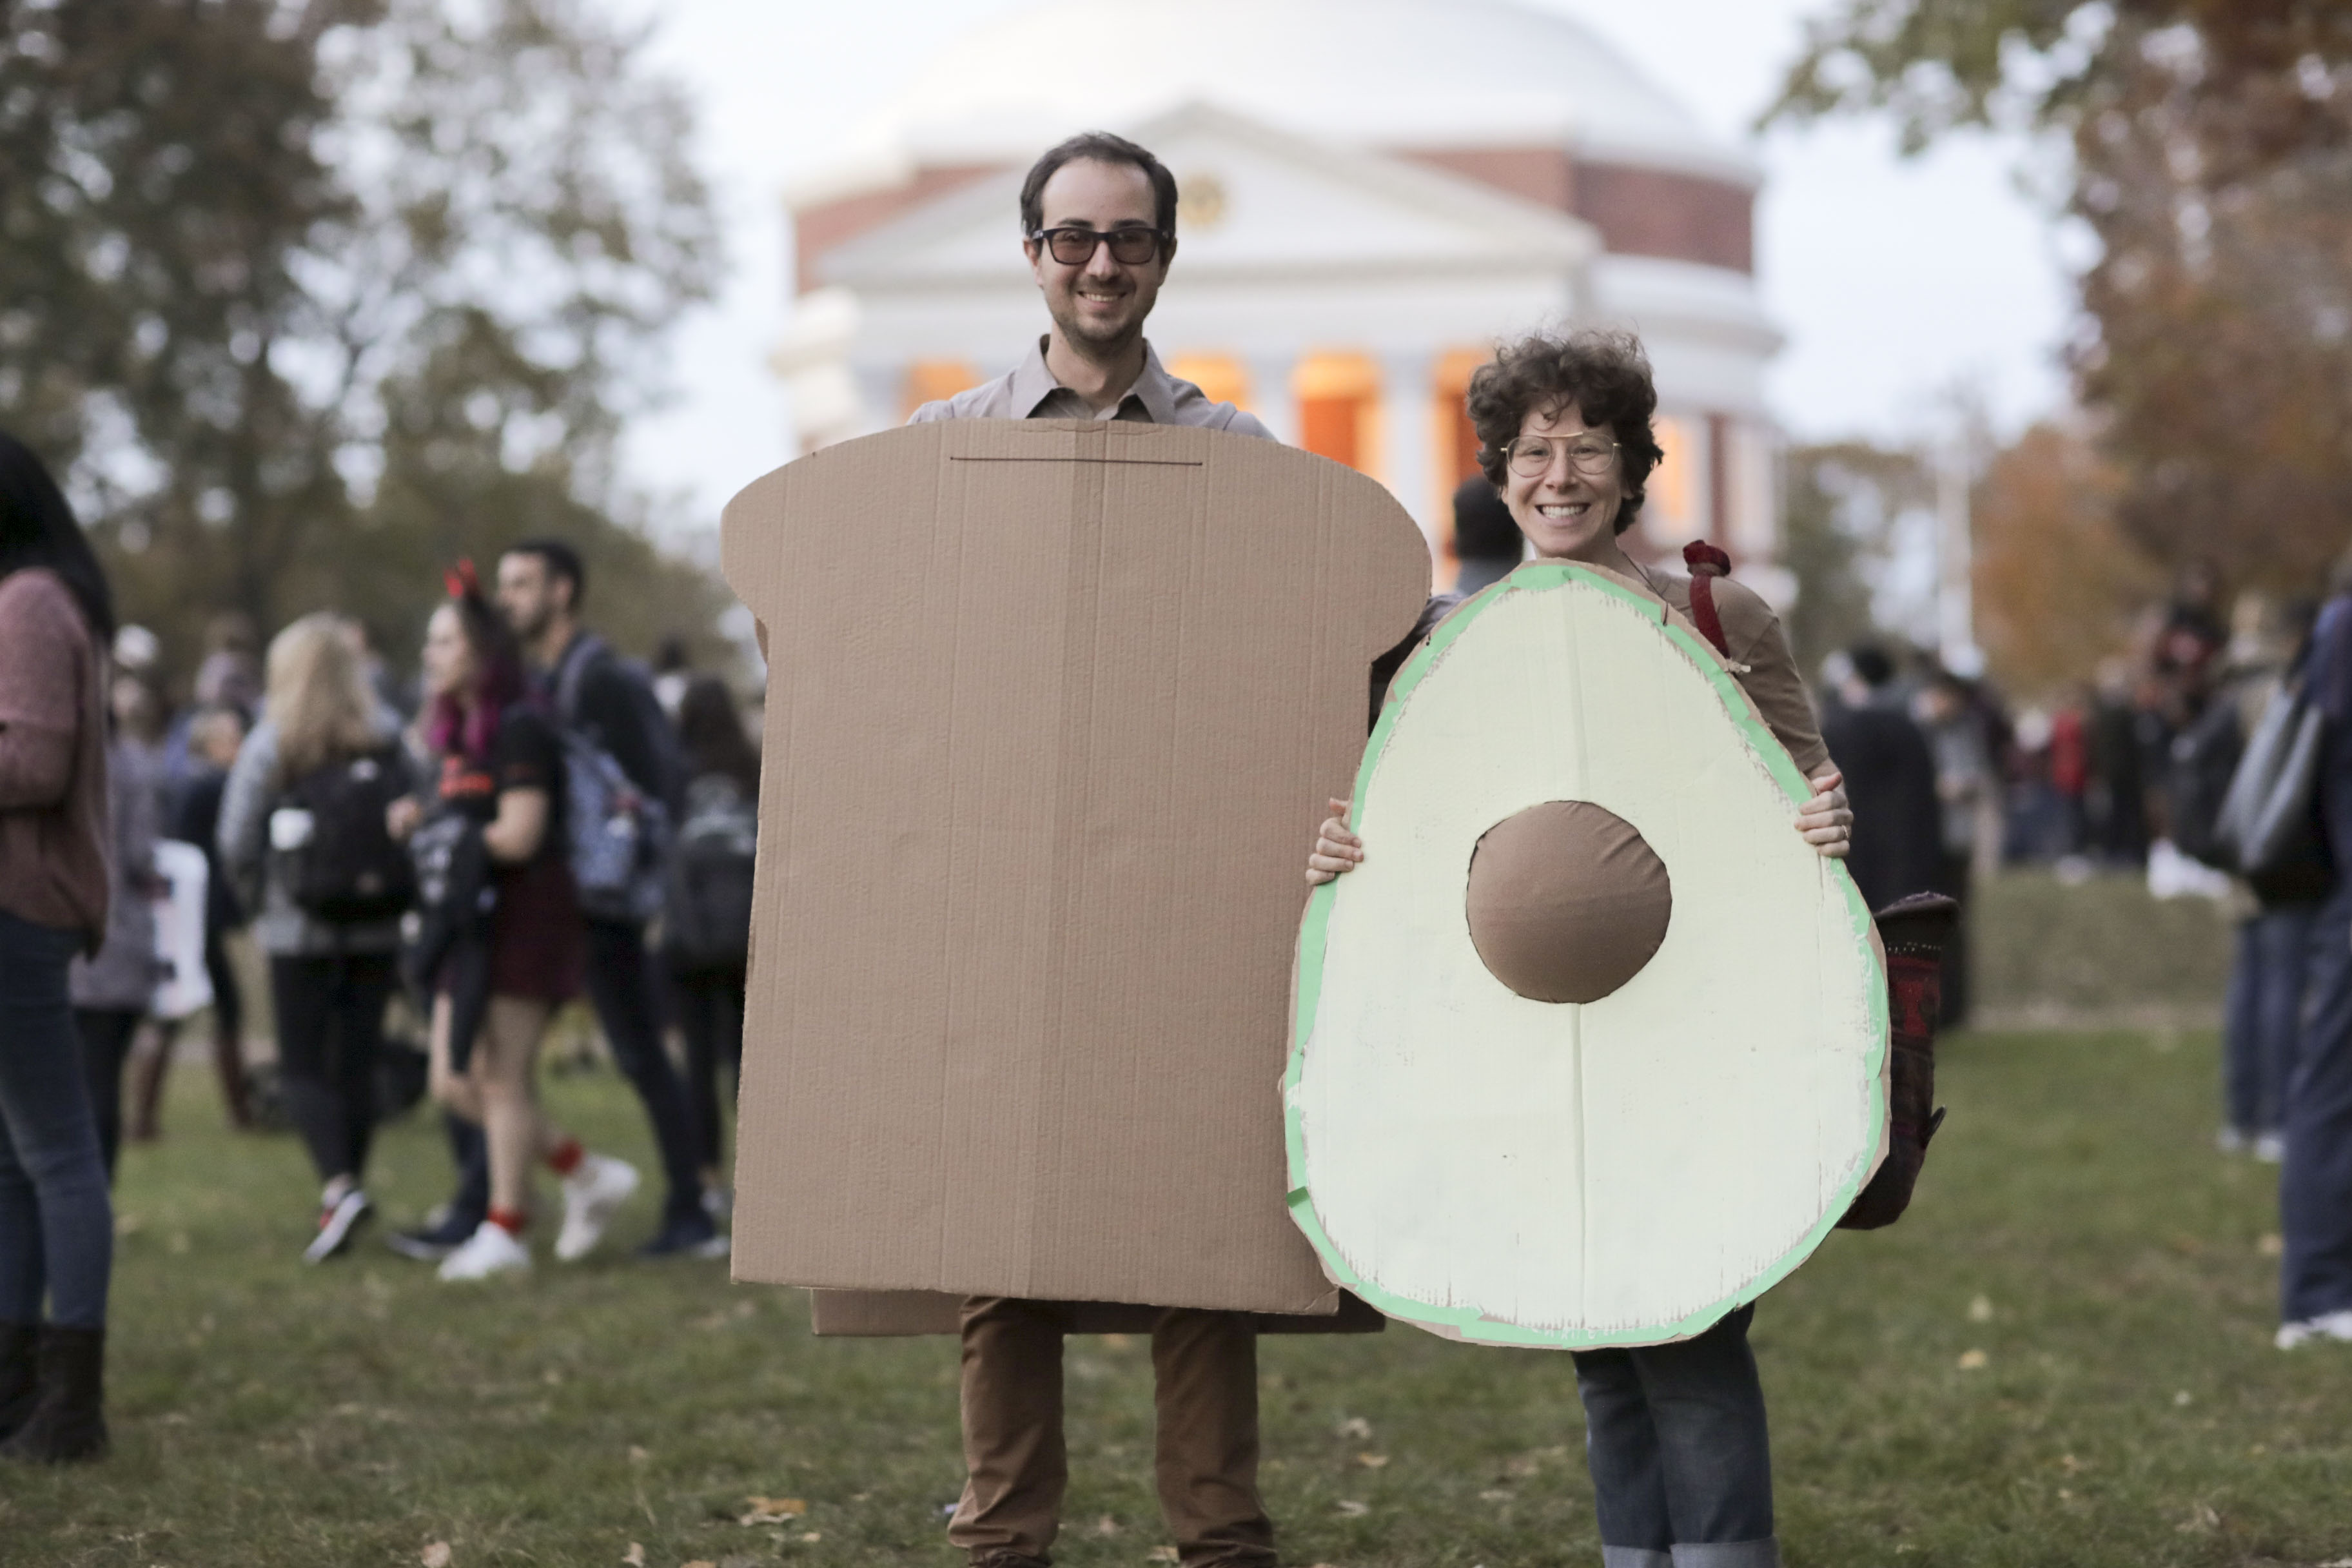 Man dressed as toast and woman dressed as an avocado